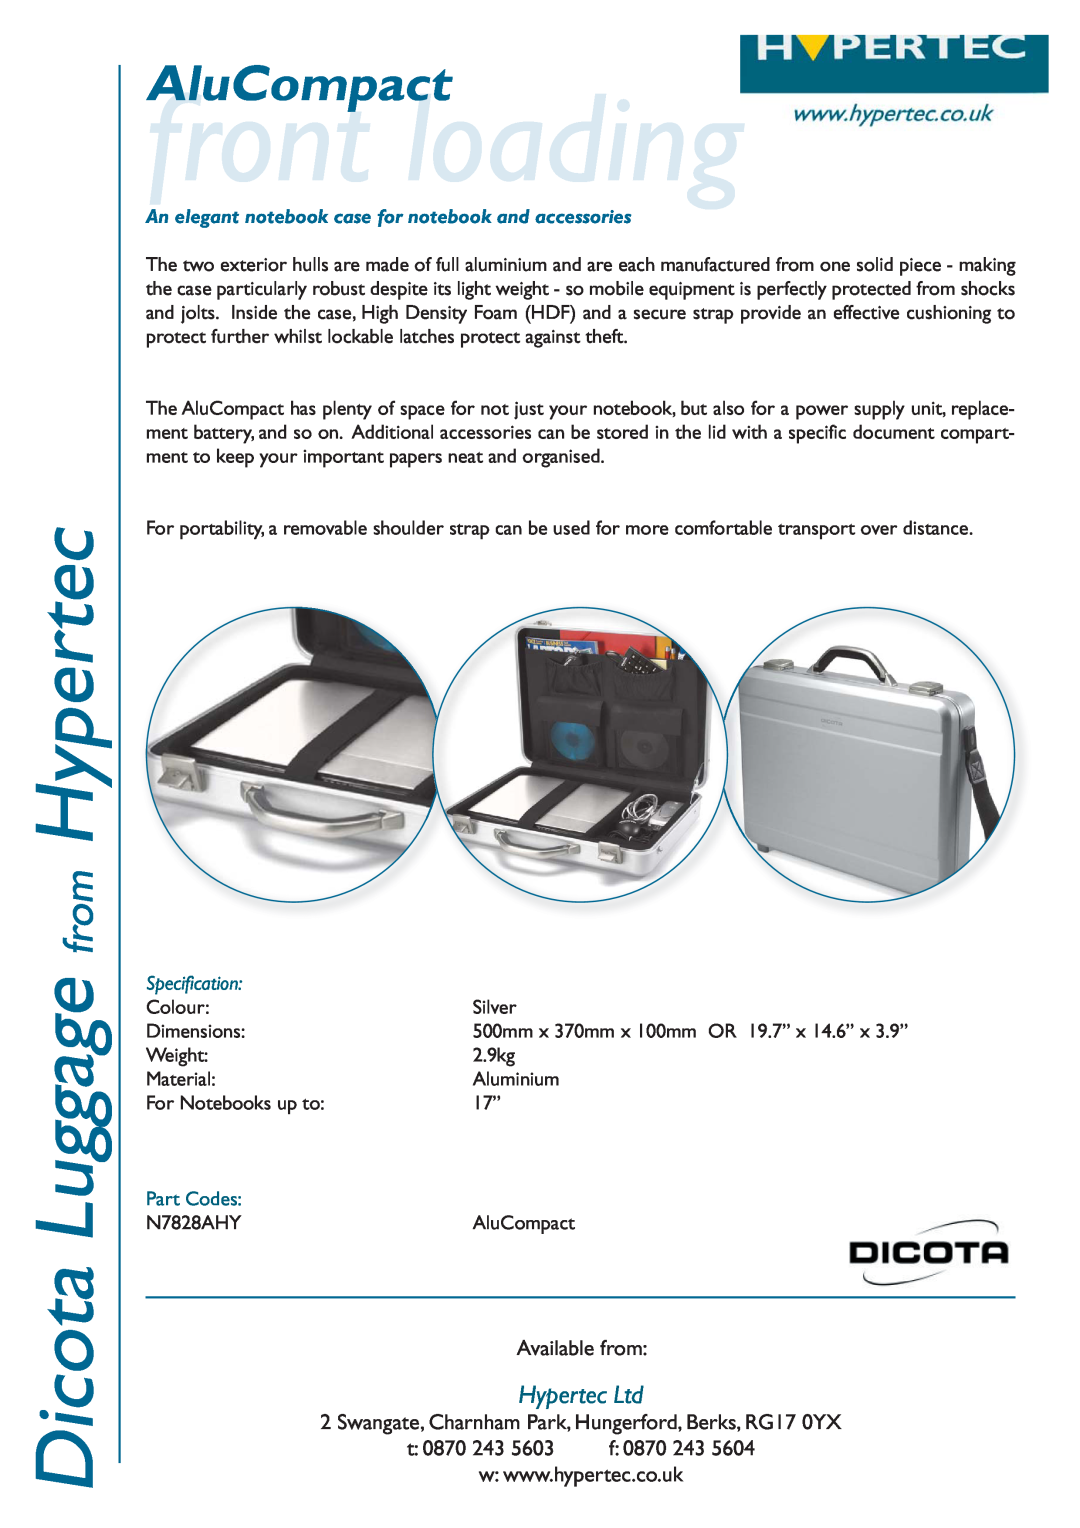 Hypertec N7828AHY dimensions front loading, Dicota Luggage from Hypertec, AluCompact, Available from, t 0870 243 